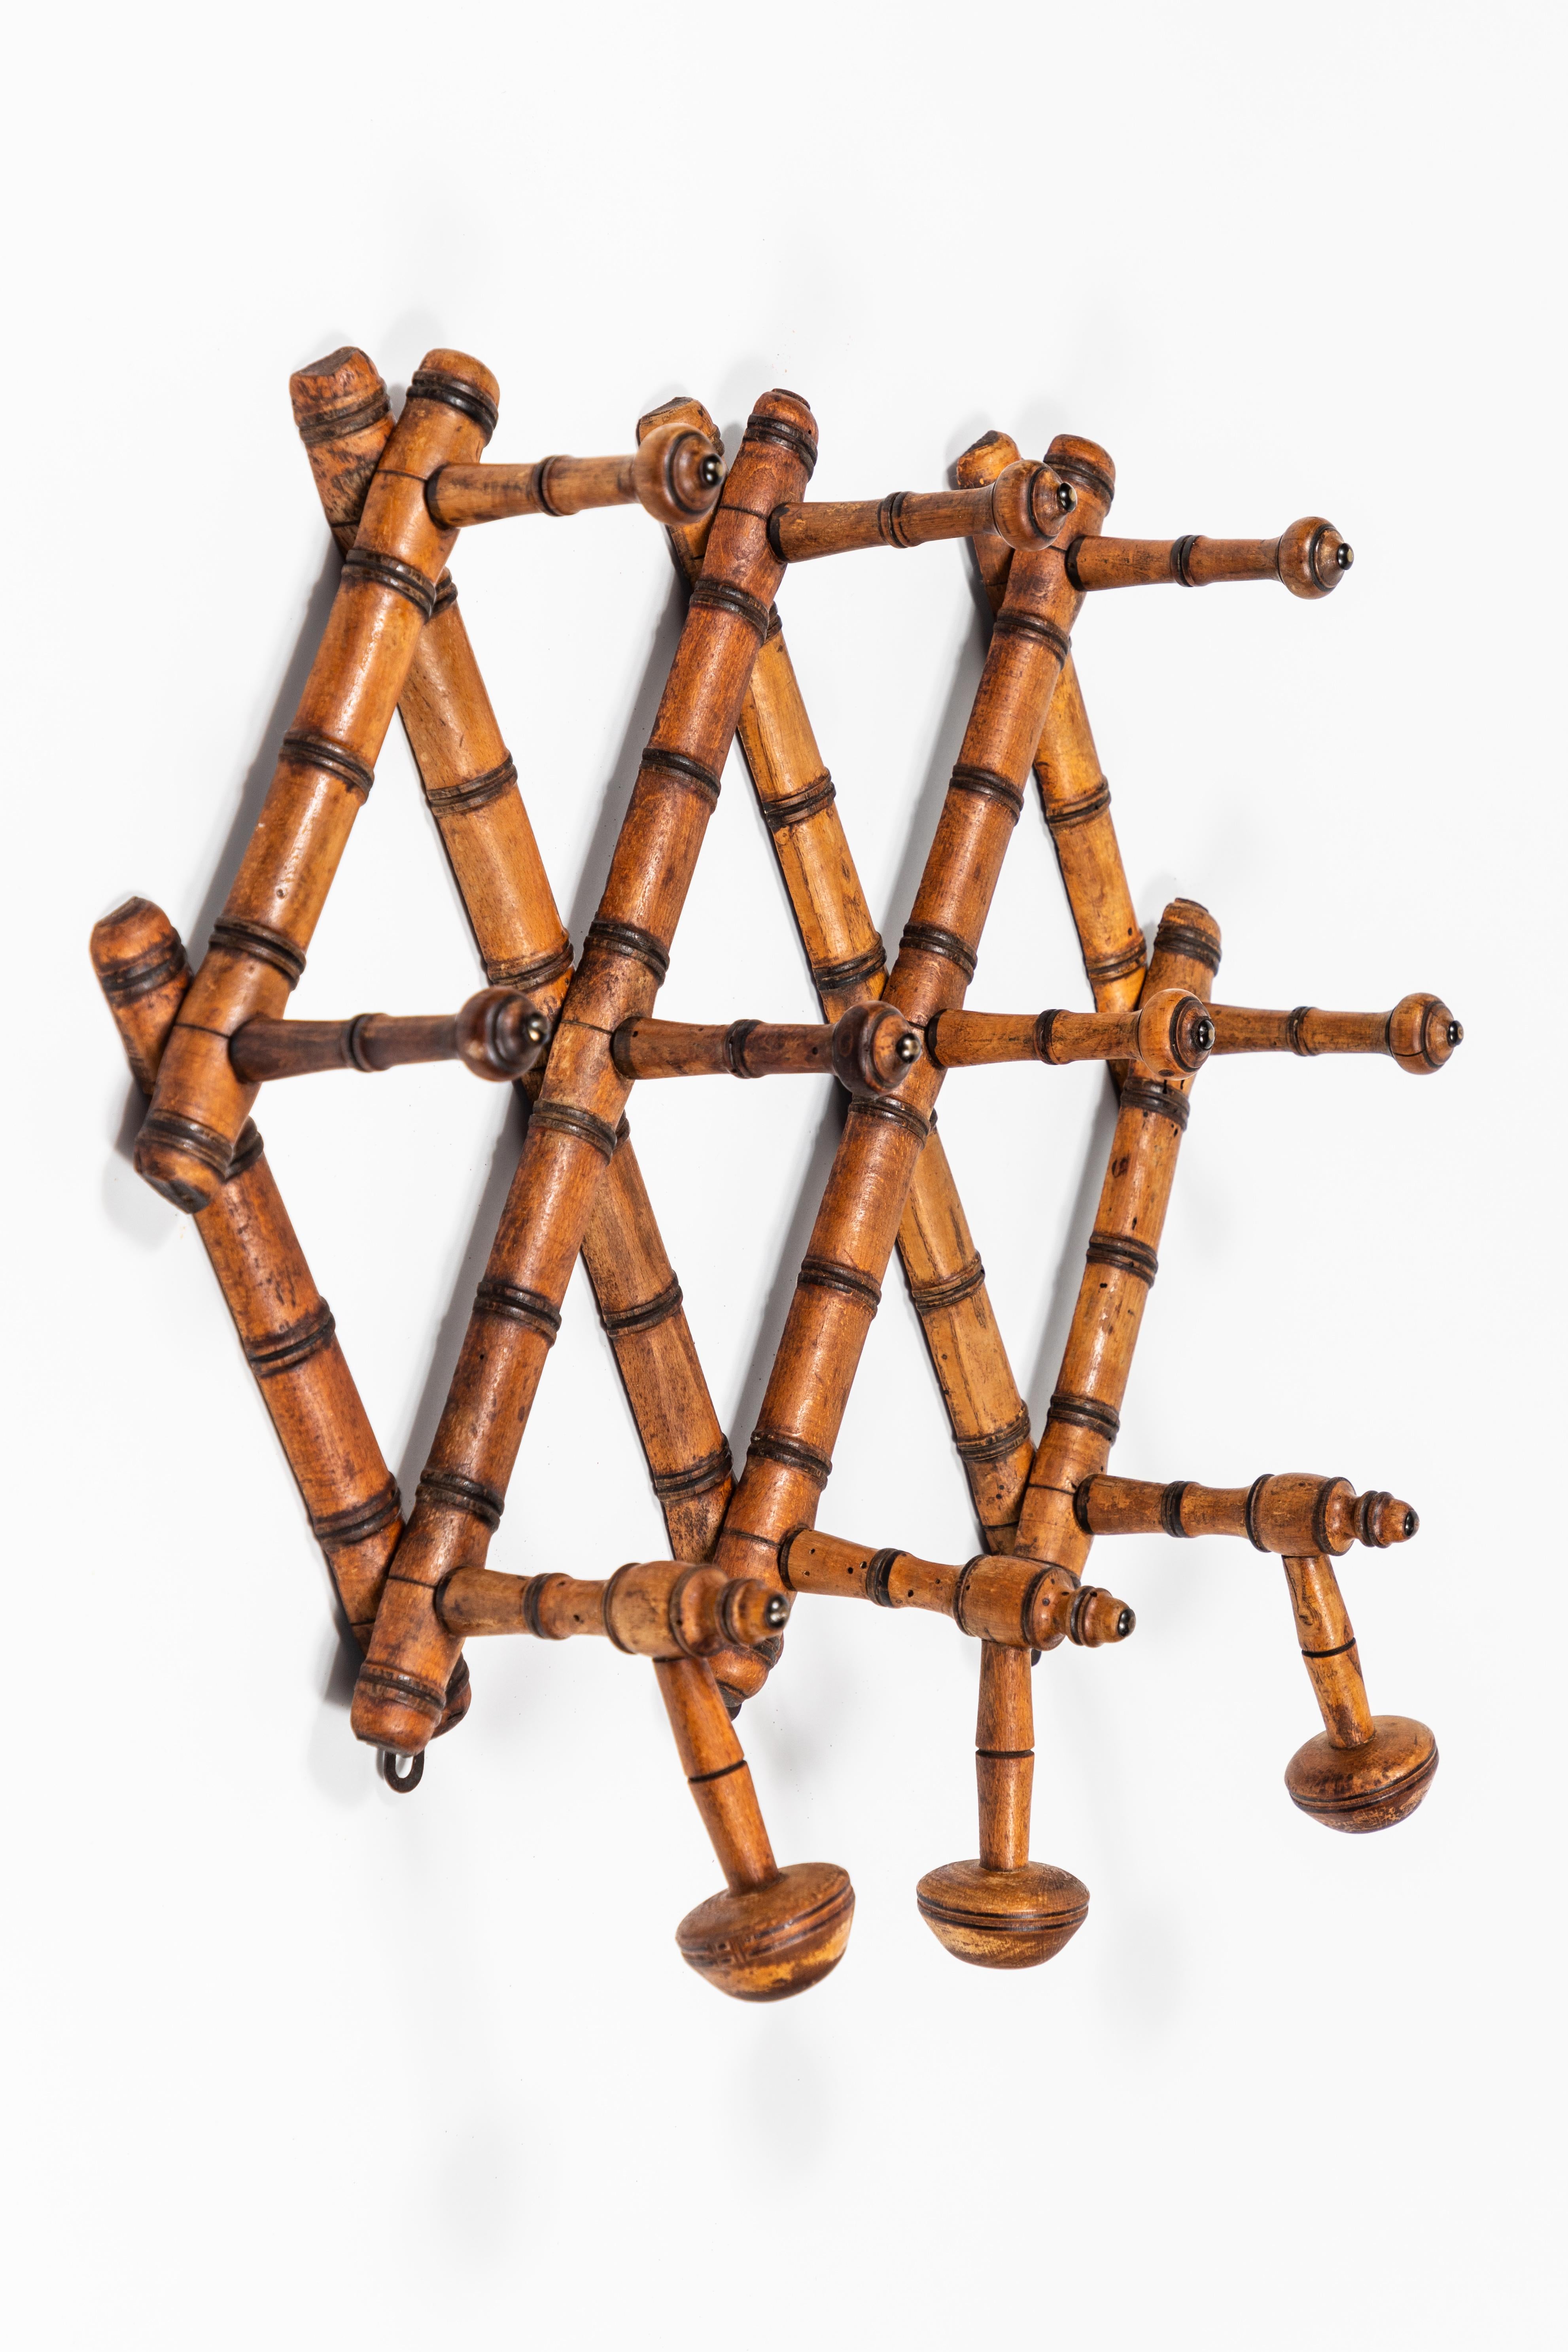 Expandable French antique bamboo 10 dowel coat rack with 3 additional arms that swivel vertically for hanging hats.
French Francs: Liberte Egalite Fraternite 1950 used a decorative washers.

May be used as a towel rack.

Dimensions: 48